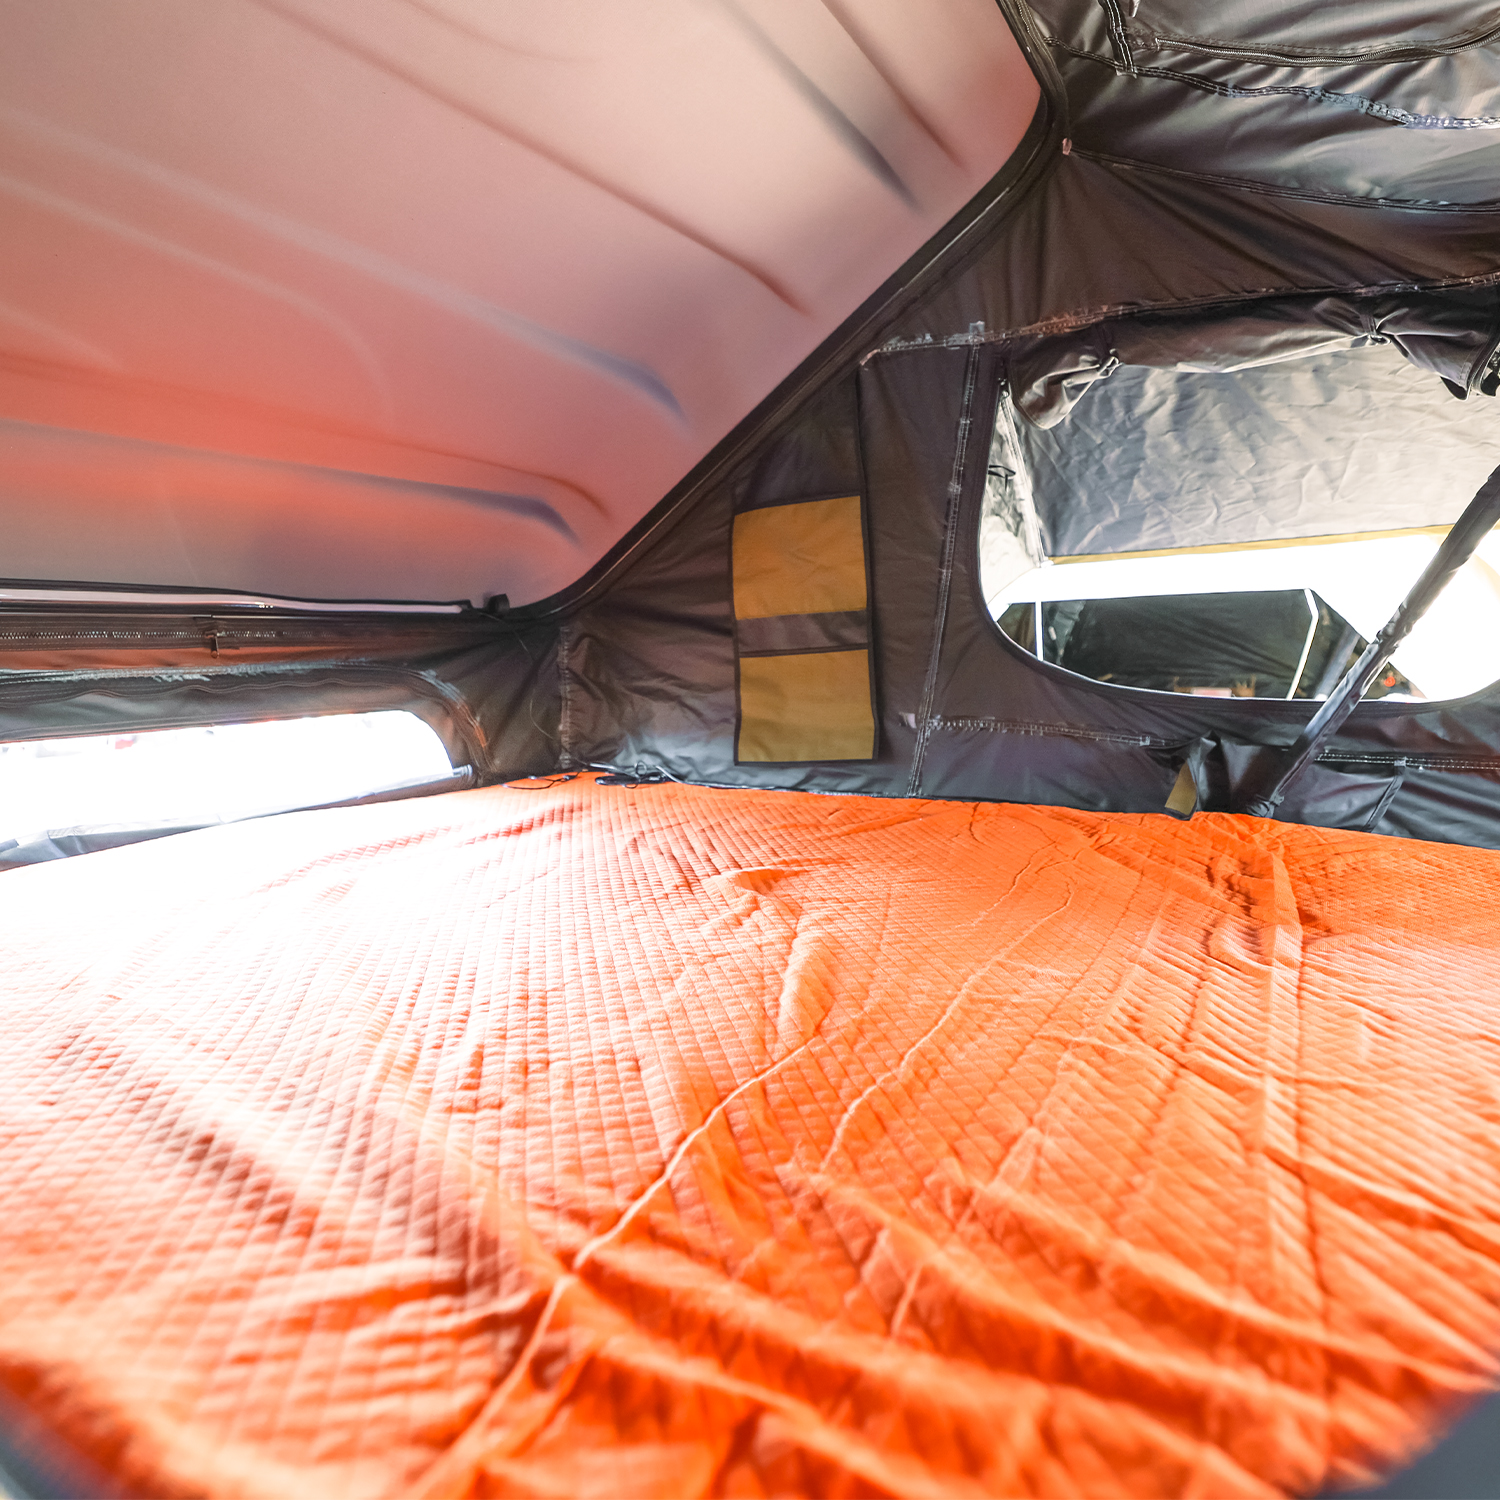 Roof Top Tent WINTER CAMPING insulation liner review and installation,  23ZERO Walkabout 62 